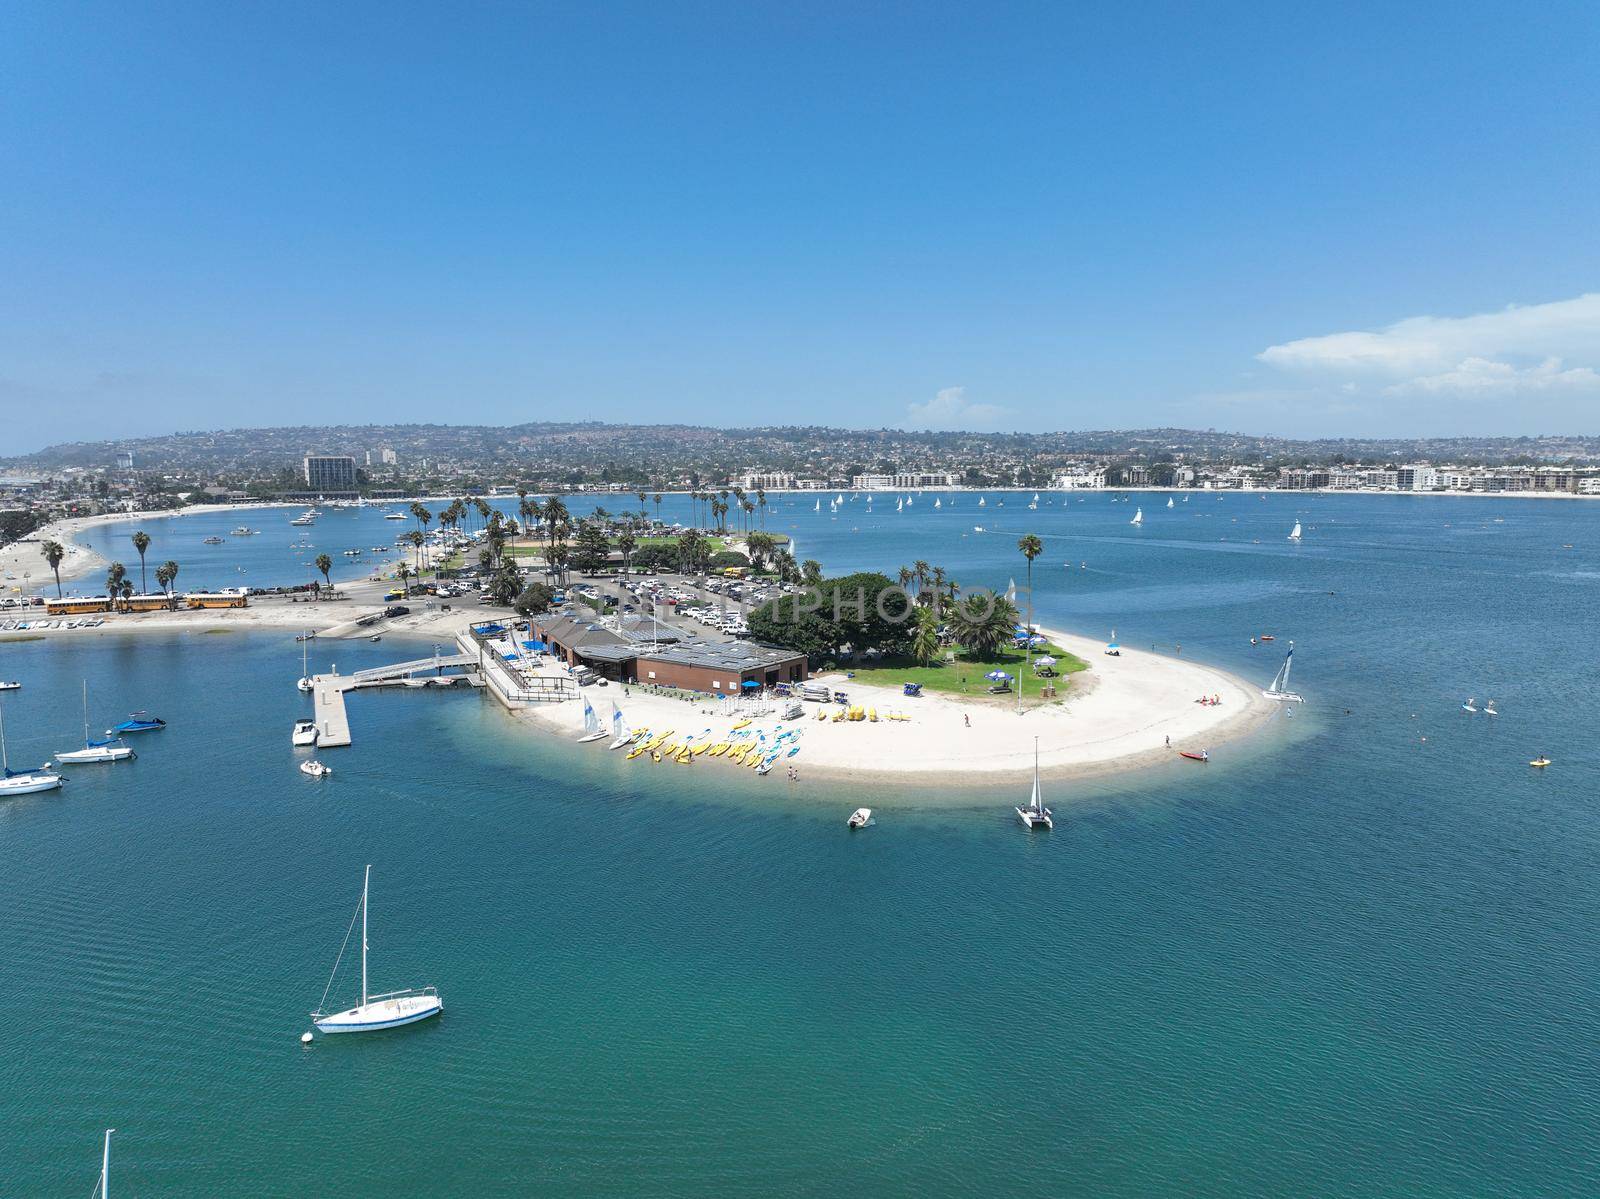 Aerial view of boats and kayaks in Mission Bay water sports zone in San Diego. Famous tourist destination, California. USA. August 22nd, 2022